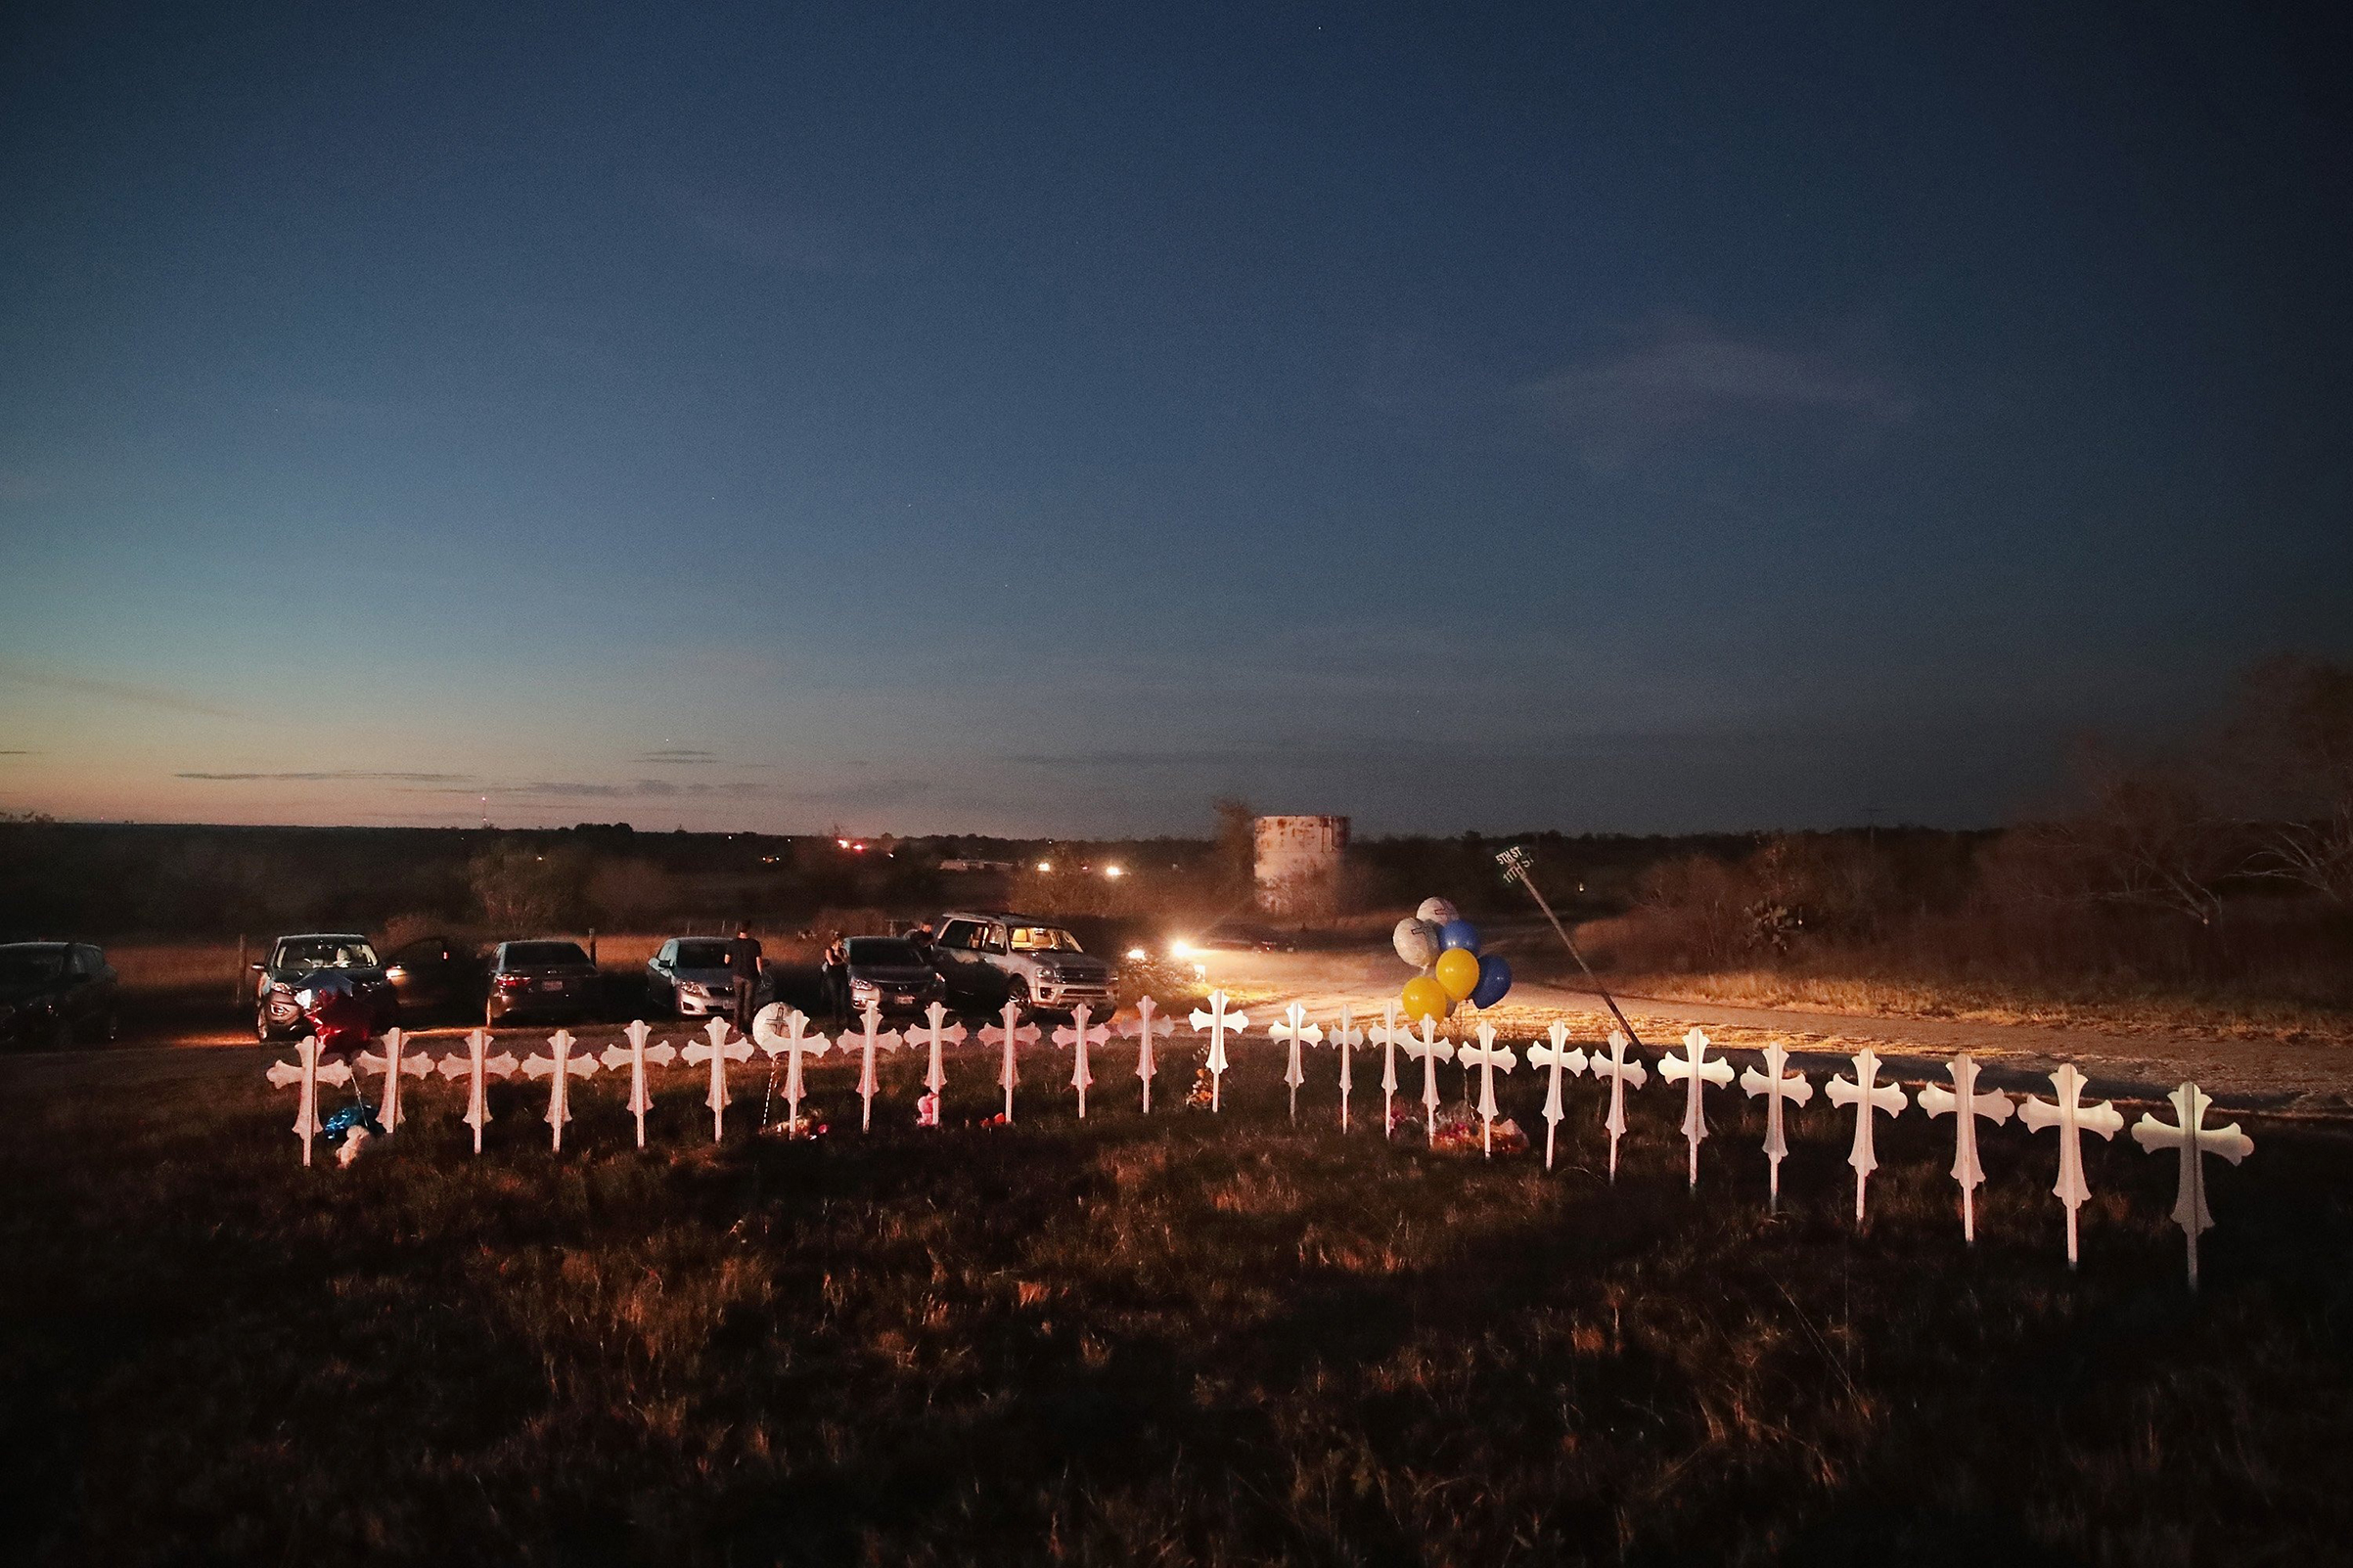 Twenty-six crosses, one for each of the dead, stand in a field on the edge of town on Nov. 6 (Scott Olson—Getty Images)